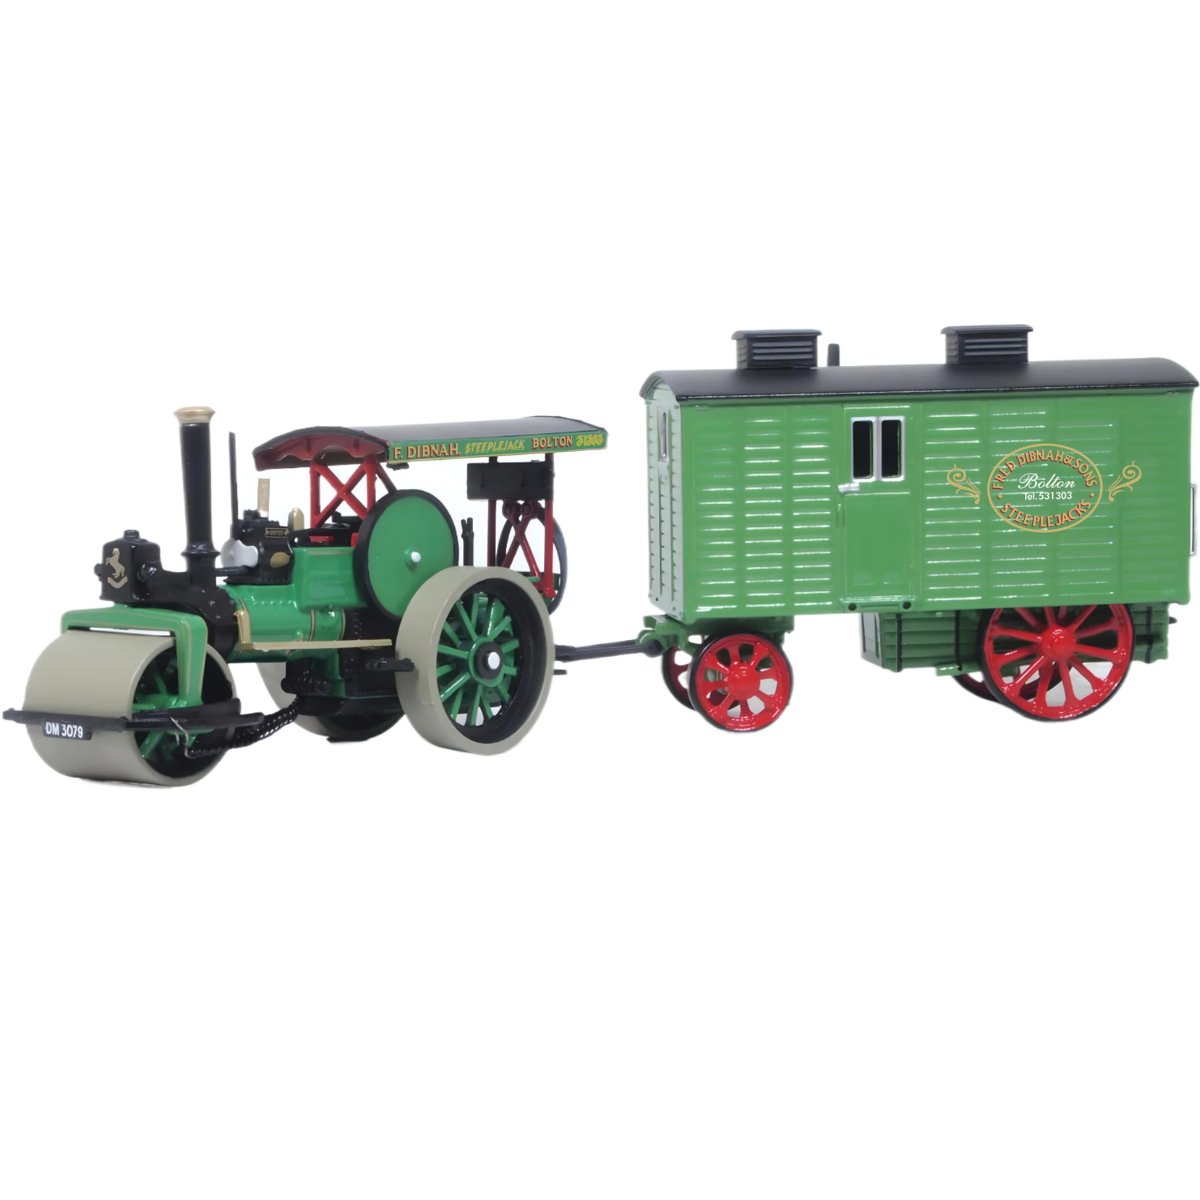 Oxford Diecast 76APR004 Fred Dibnah Aveling & Porter Road Roller (Betsy) & Wagon - Phillips Hobbies